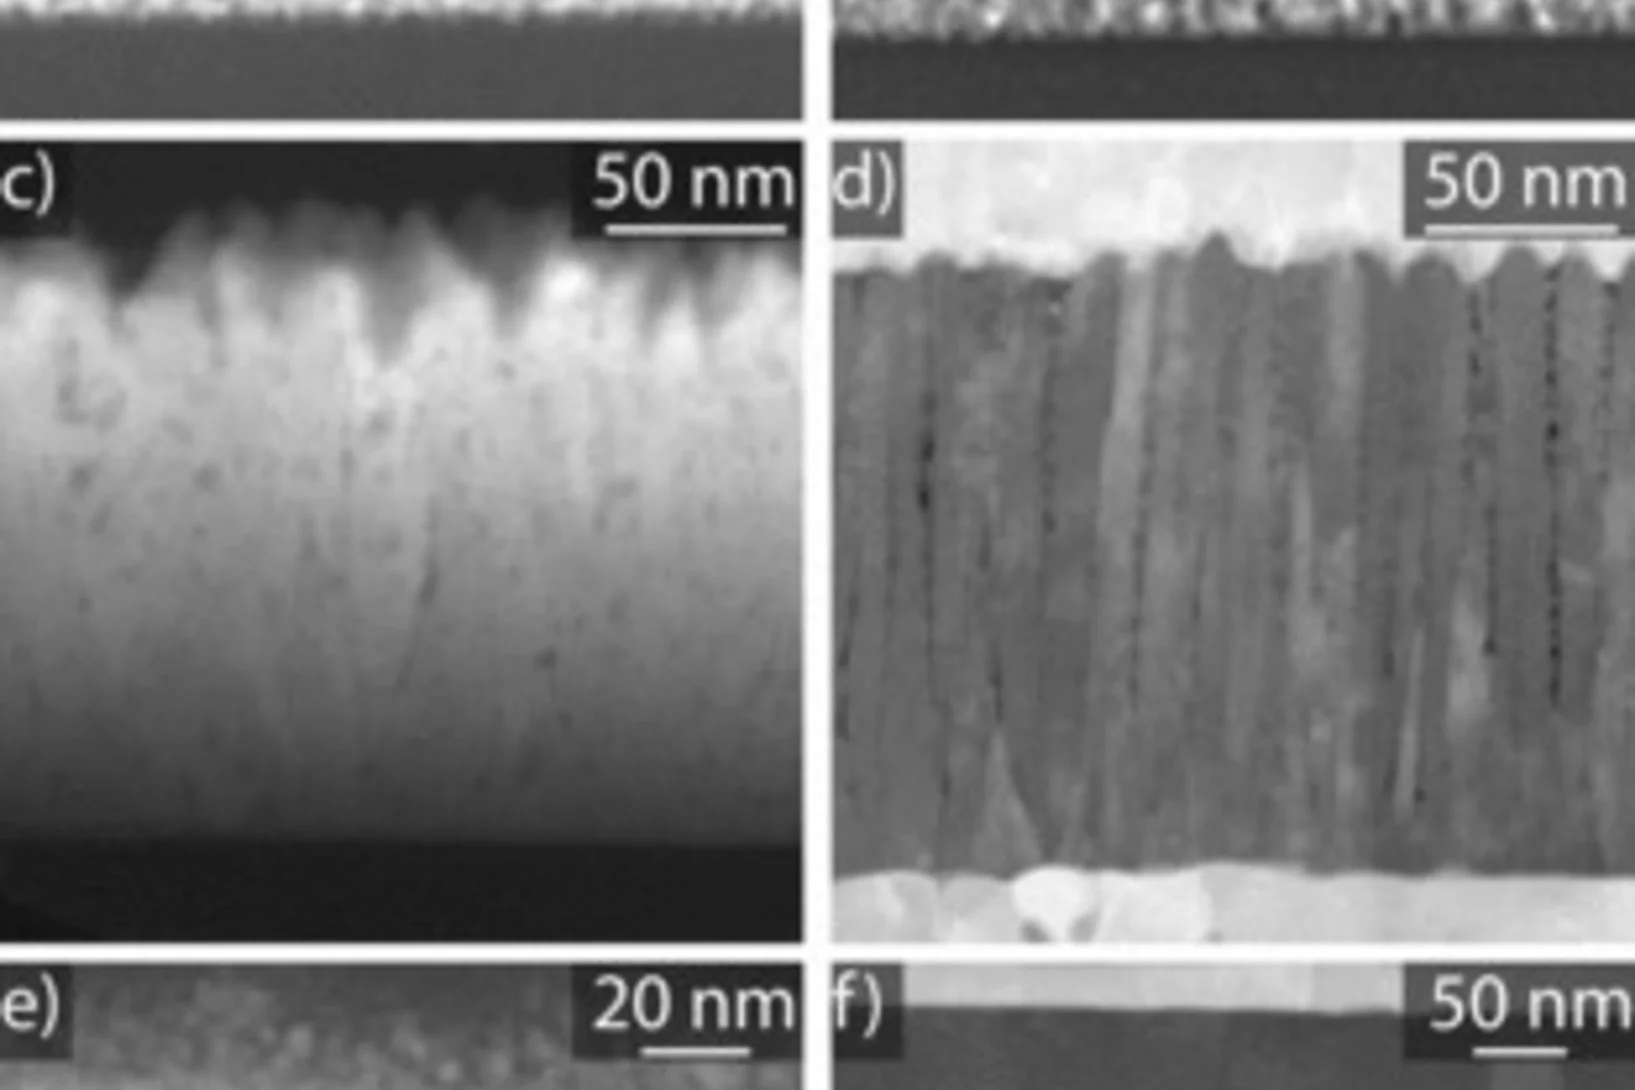 HAADF STEM micrographs of YSZ thin films deposited by different methods. a) 8YSZ SP (Tdep = 370 °C; Tpa = 600 °C, 20 h), b) 8YSZ AA-CVD (Tdep = 450 °C, Tpa = 600 °C, 20 h), c) 8YSZ AA-CVD (Tdep = 600 °C, Tpa = 600 °C for 20 h), d) 3YSZ PLD (Tdep = 450 °C, pO2 = 7 Pa, Tpa = 600 °C, 1 h) with top and bottom electrode, e) 3YSZ PLD (Tdep = 450 °C, pO2 = 1 Pa, Tpa = 600 °C, 1 h), and f) 8YSZ PLD (Tdep = 700 °C, pO2 = 2.7 Pa, Tpa = 600 °C, 20 h) with top and bottom electrodes.